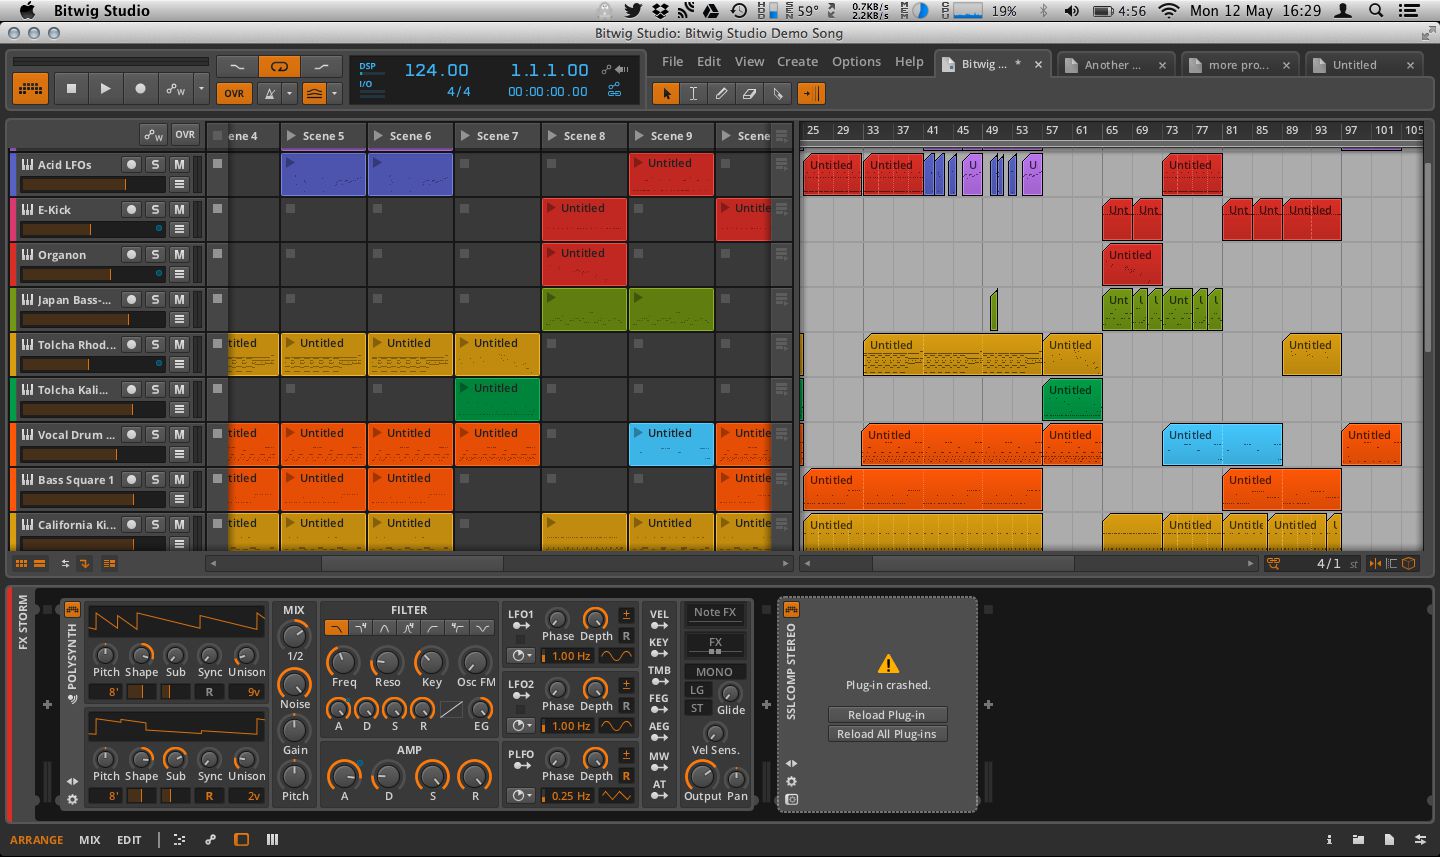 That's right! Bitwig continues to run when a plug-in crashes…